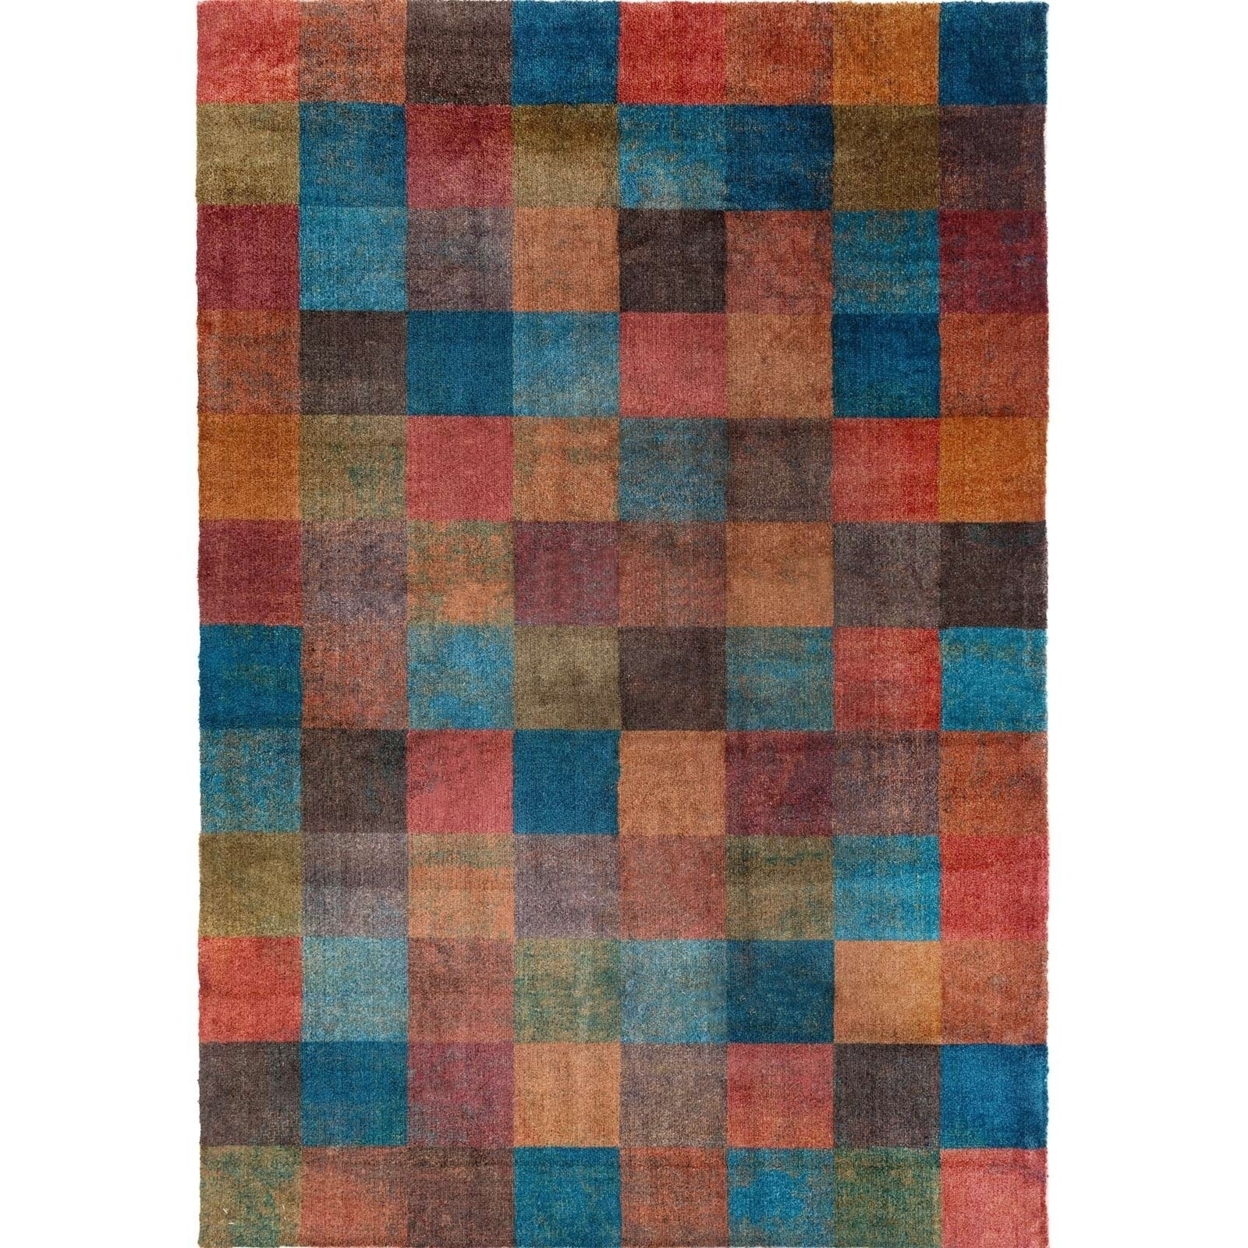 Chrys Modern Contemporary Mosaic Geometric Striped Abstract Accent Rug for Living Room Bedroom, 5"x7"